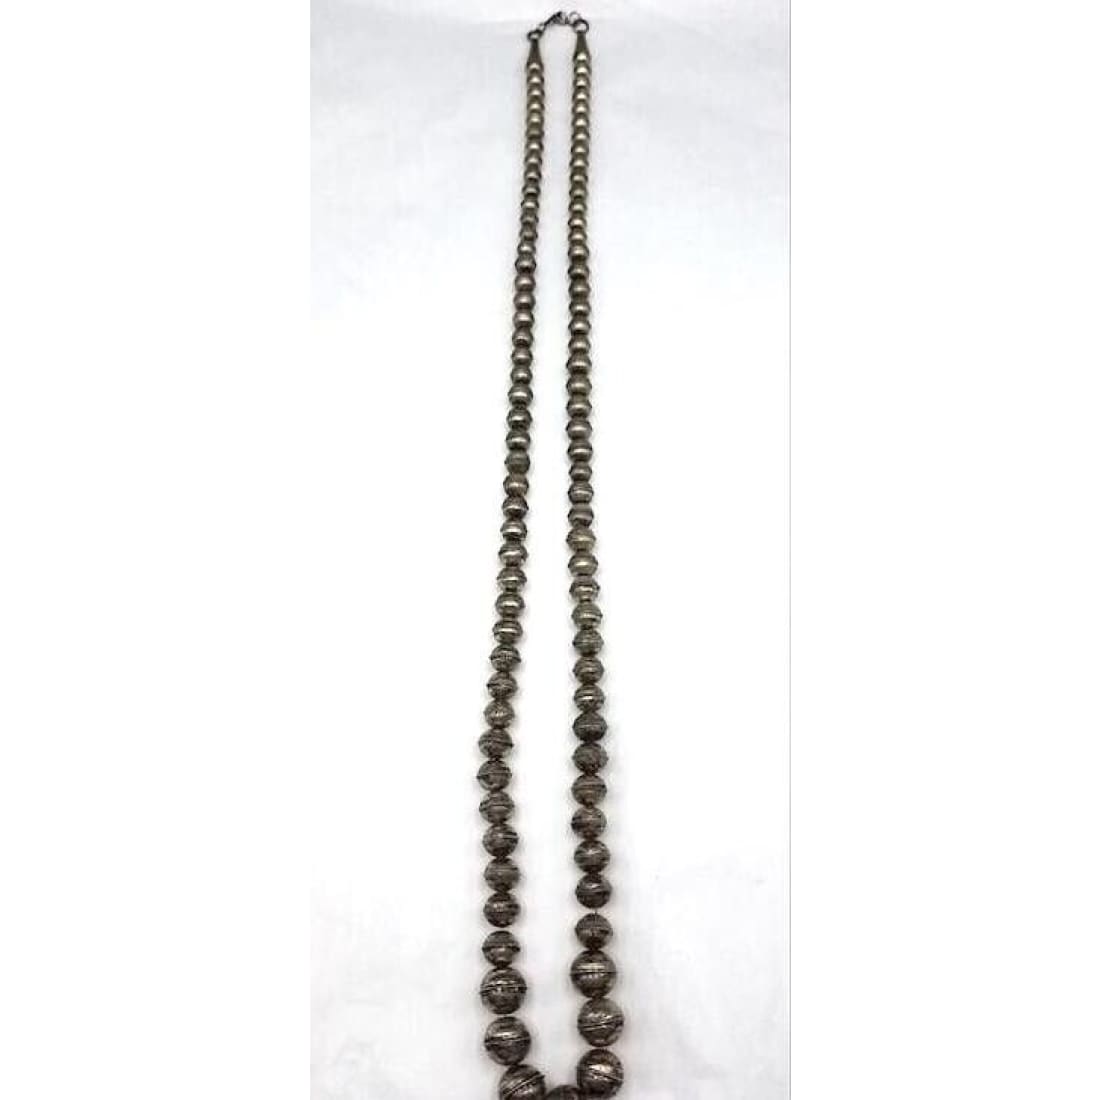 Old Pawn Navajo Pearls Necklace Graduated Beads Sterling